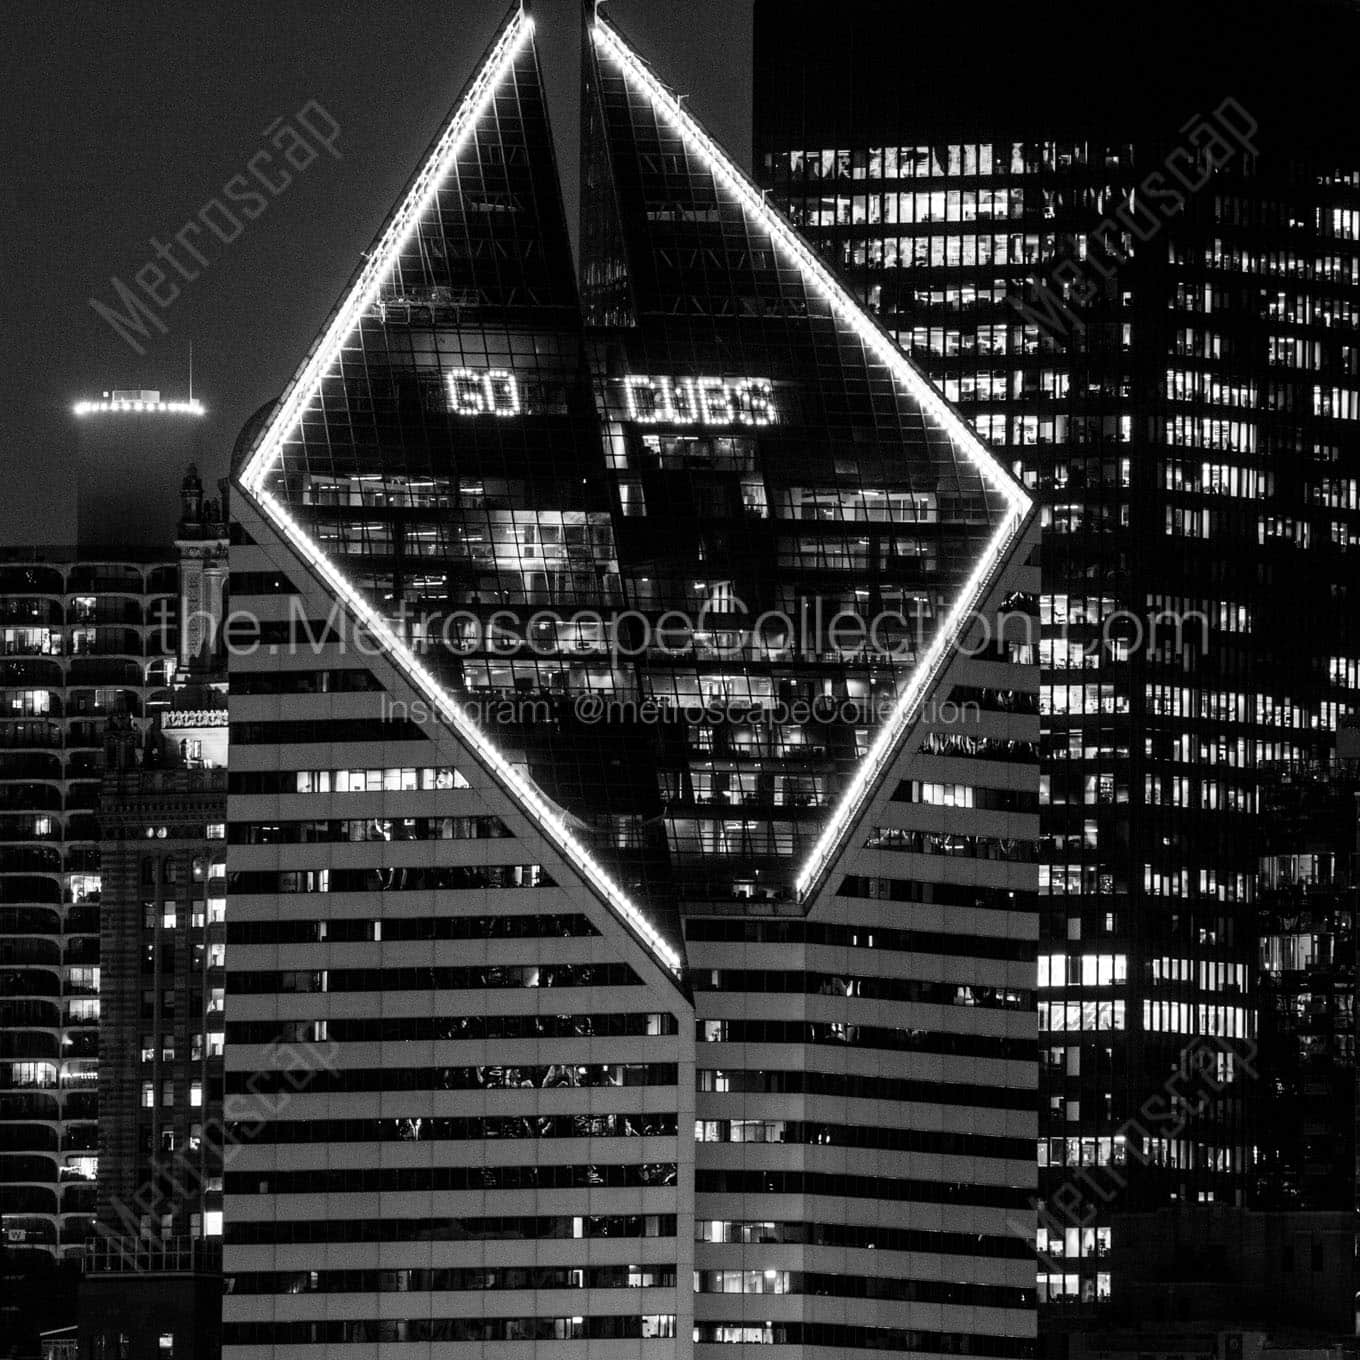 go cubs in smurfit stone building at night Black & White Office Art